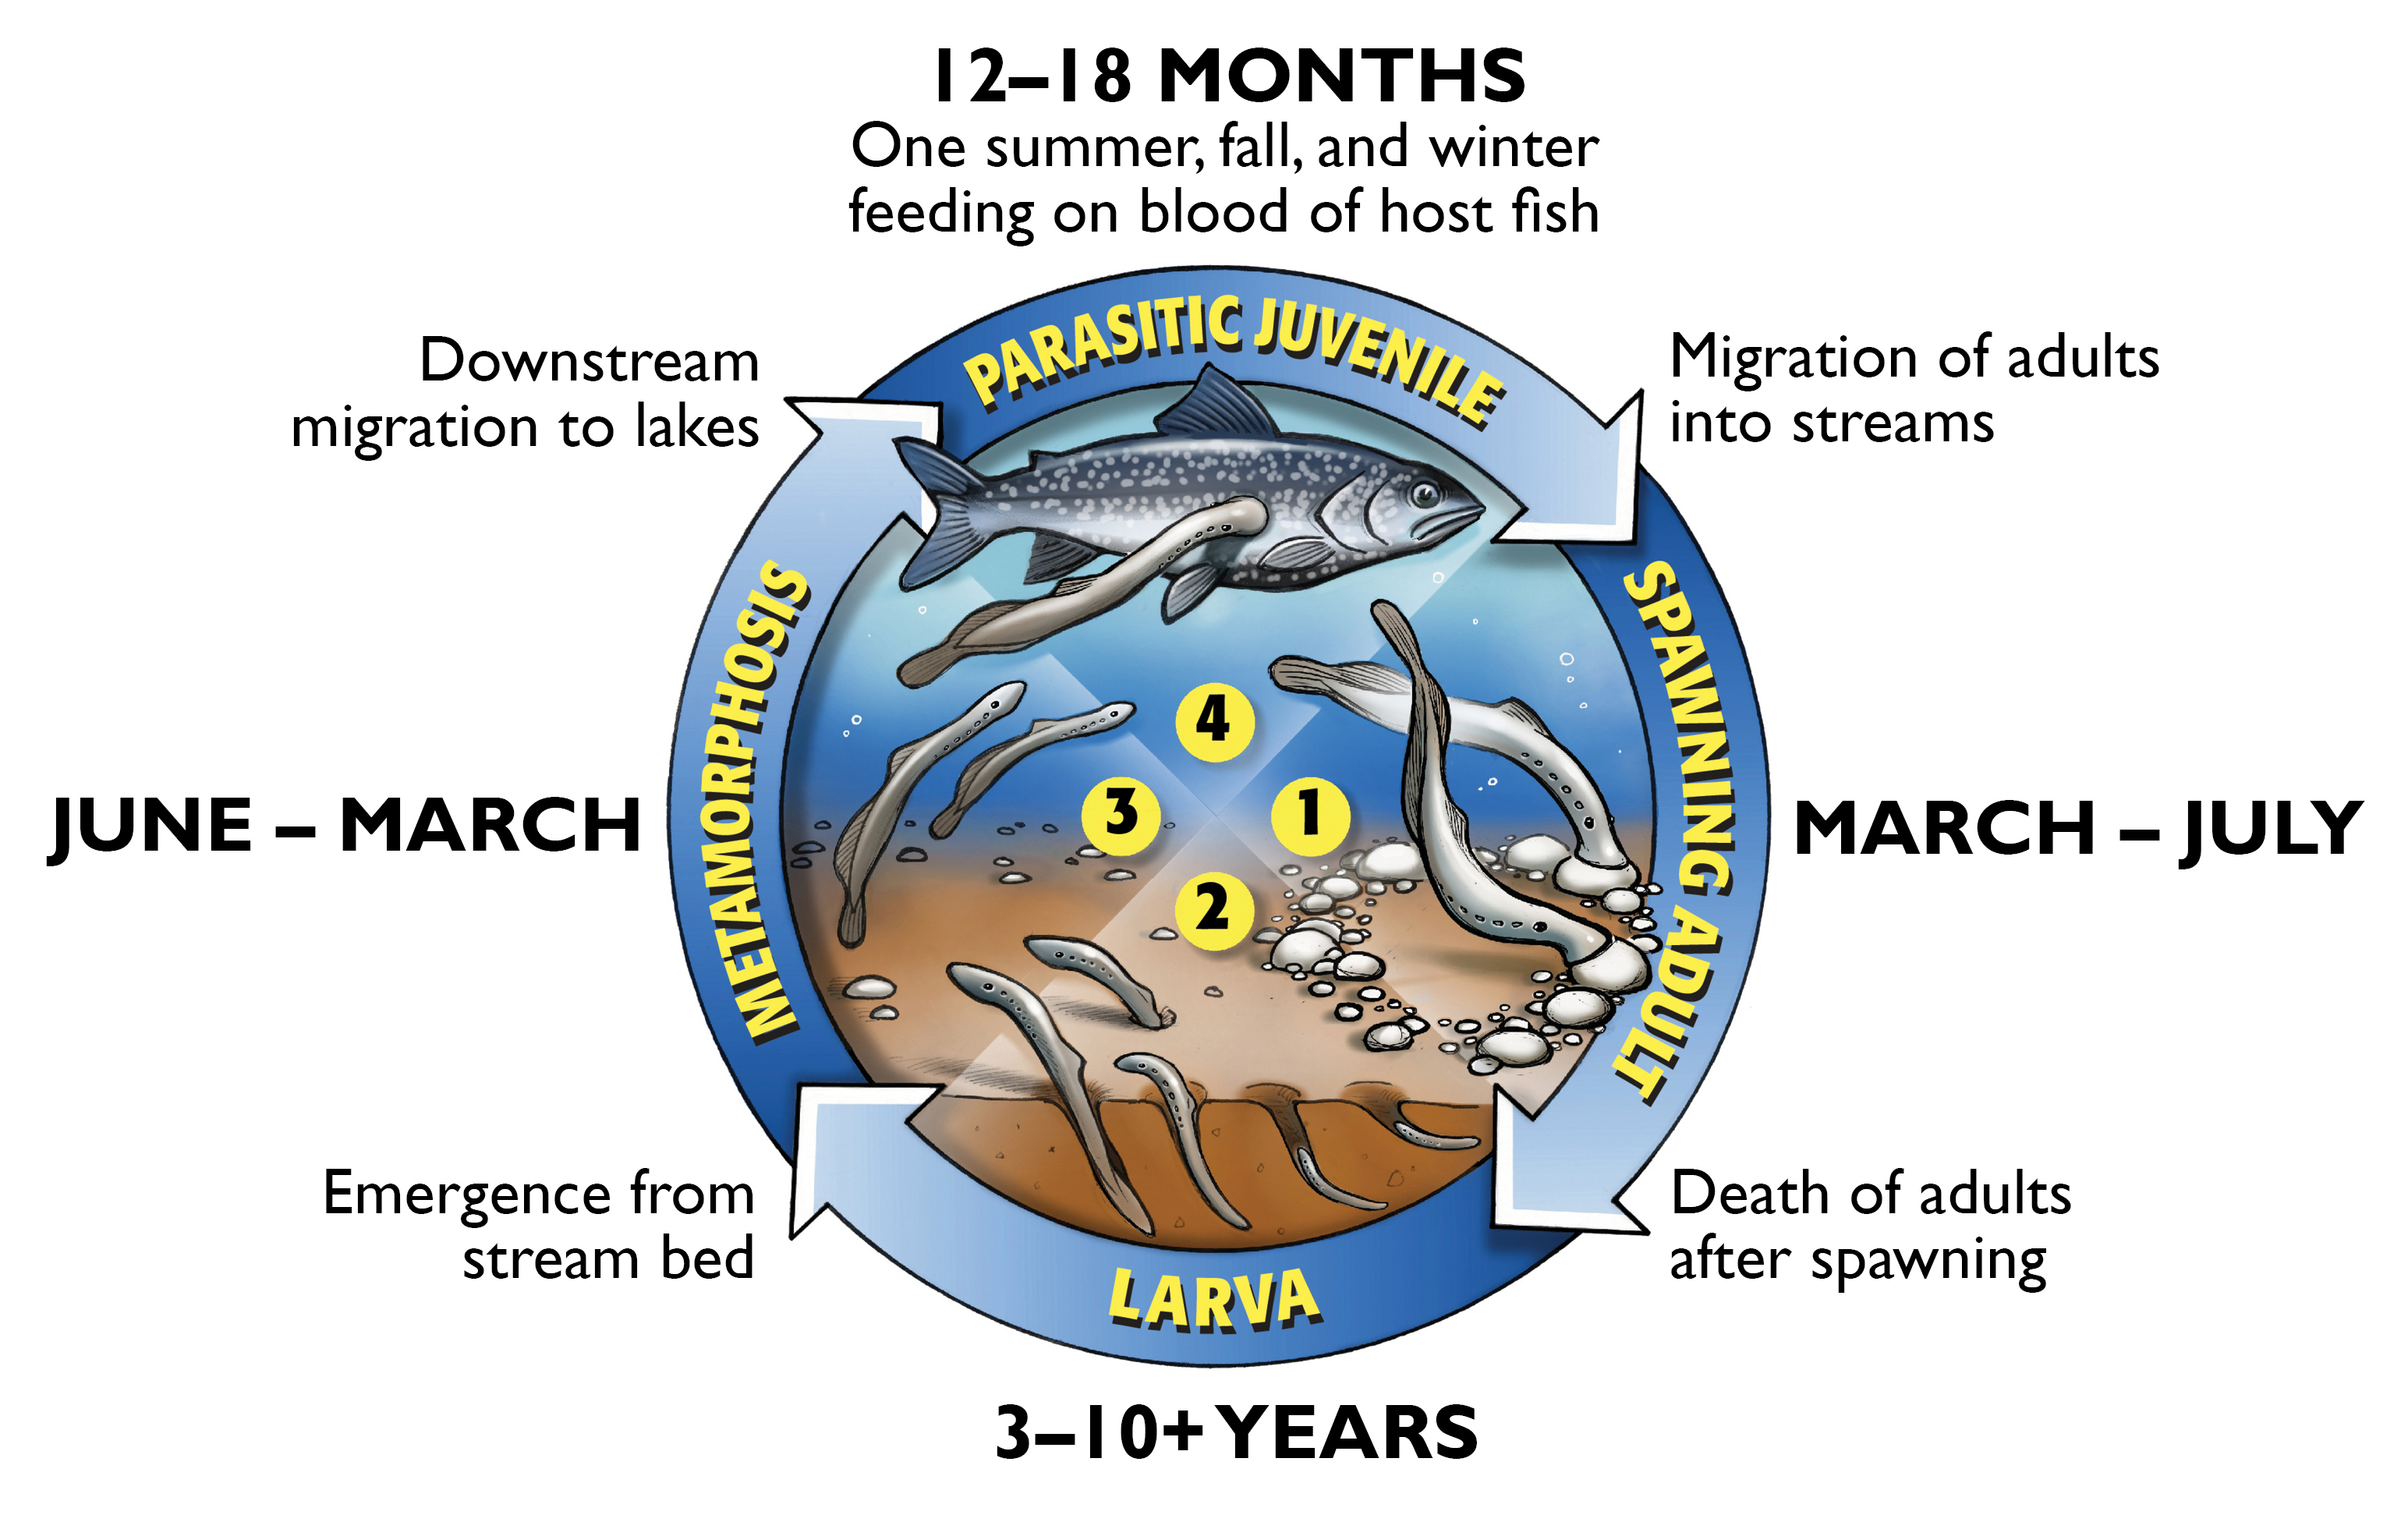 A graphic of the sea lamprey lifecycle.  The lifecycle of a sea lamprey displayed in four quadrants of a circle.  First phase of the lamprey lifecycle consists of spawning adults in streams from March to July.  The second phase of the sea lamprey lifecycle consists of larval sea lamprey that live burrowed in stream bottoms for three to ten or more years.  Larval sea lamprey emerge from the stream bed and undergo metamorphosis during the third stage of their lifecycle which occurs from June through March.  Metamorphosed sea lamprey migrate downstream to the open lakes and enter the fourth stage of their lifecycle, as a parasitic juvenile.  Sea lamprey spend approximately twelve to eighteen months (one summer, fall, and winter) feeding on the blood of host fish as parasitic juveniles.  Upon completion of this fourth life stage adult sea lamprey migrate up stream and spawn completing the circle.